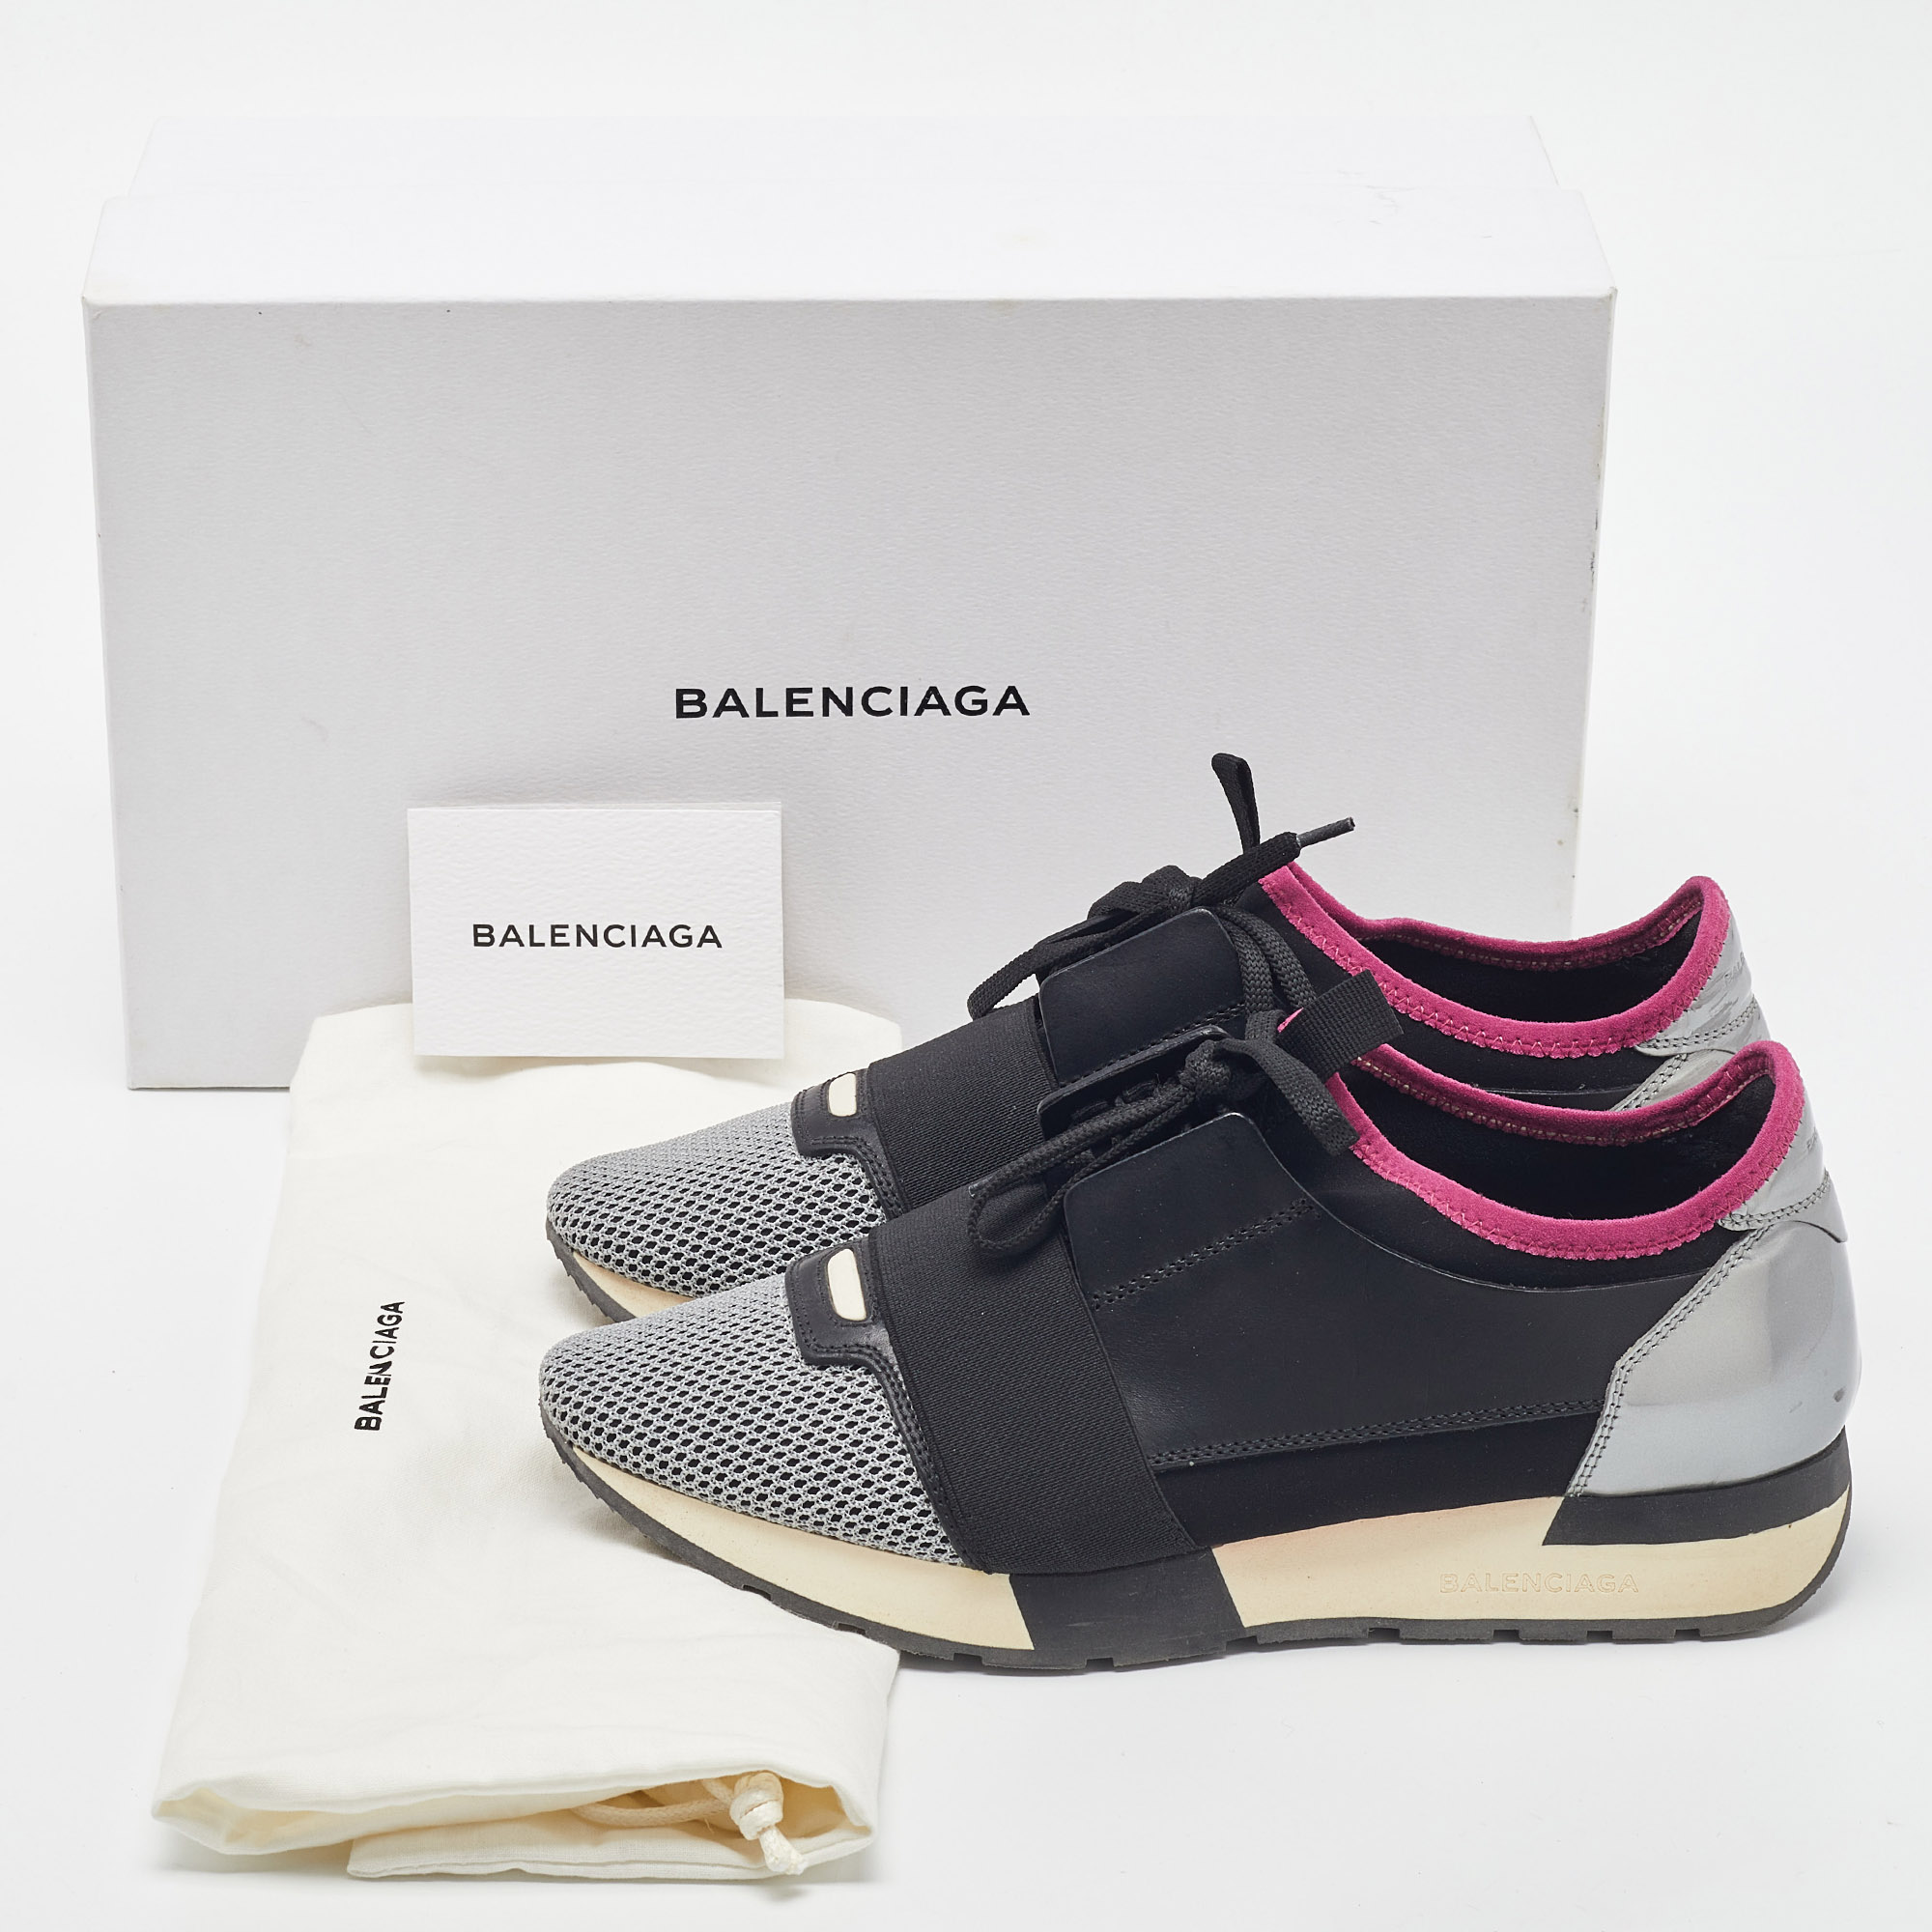 Balenciaga Tricolor Mesh And Leather Race Runner Sneakers Size 40